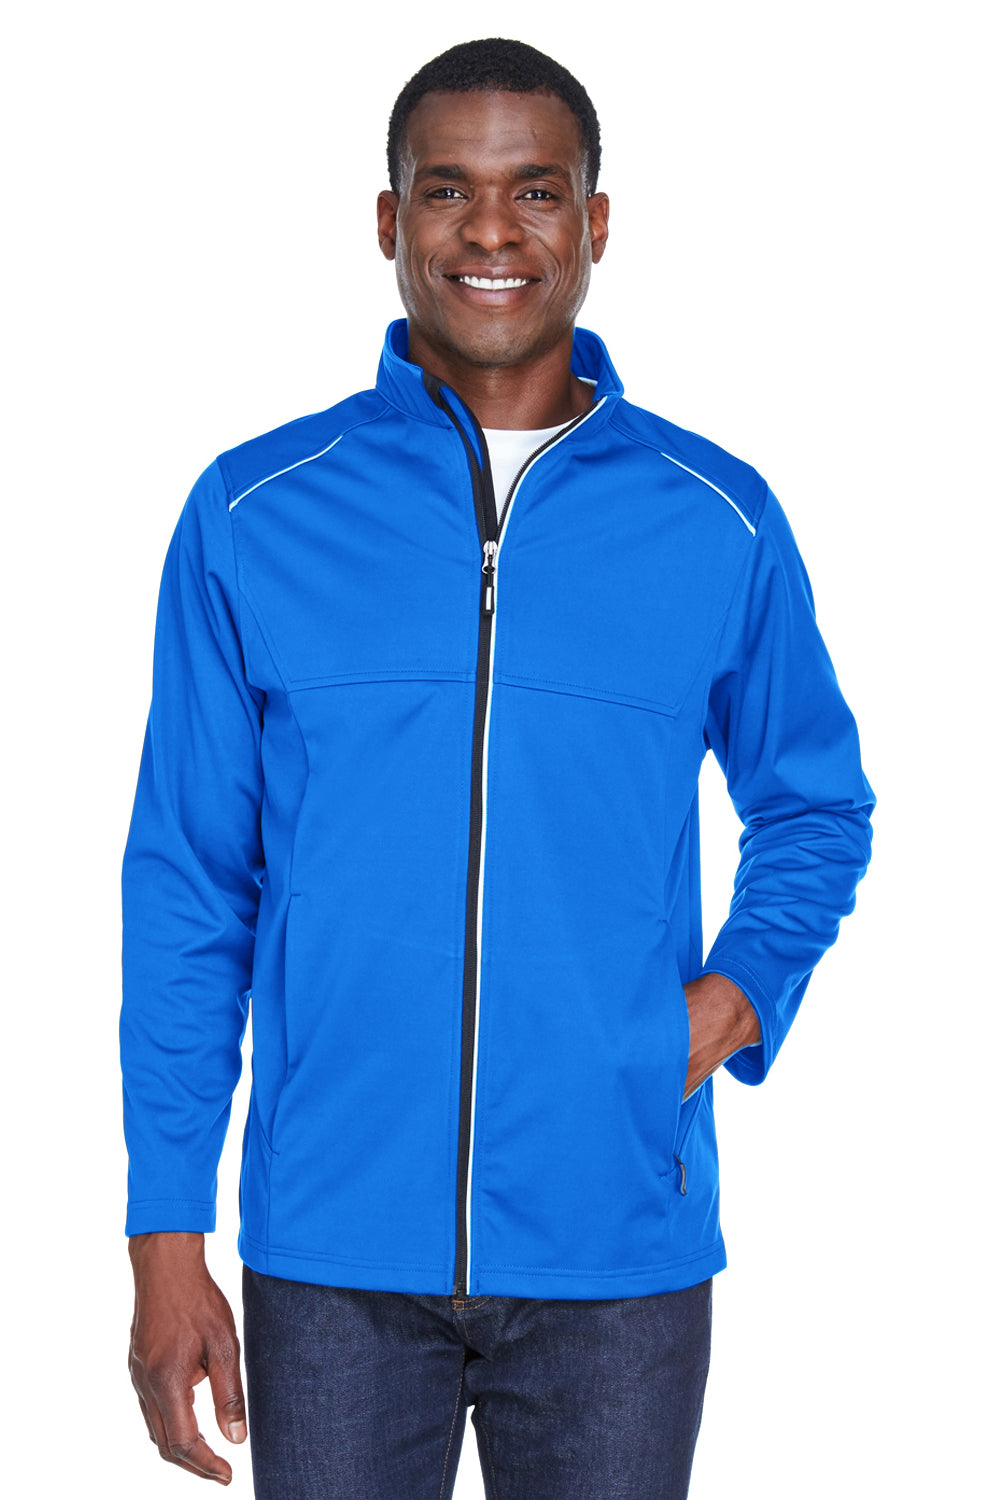 Core 365 CE708 Mens Techno Lite Water Resistant Full Zip Jacket Royal Blue Front